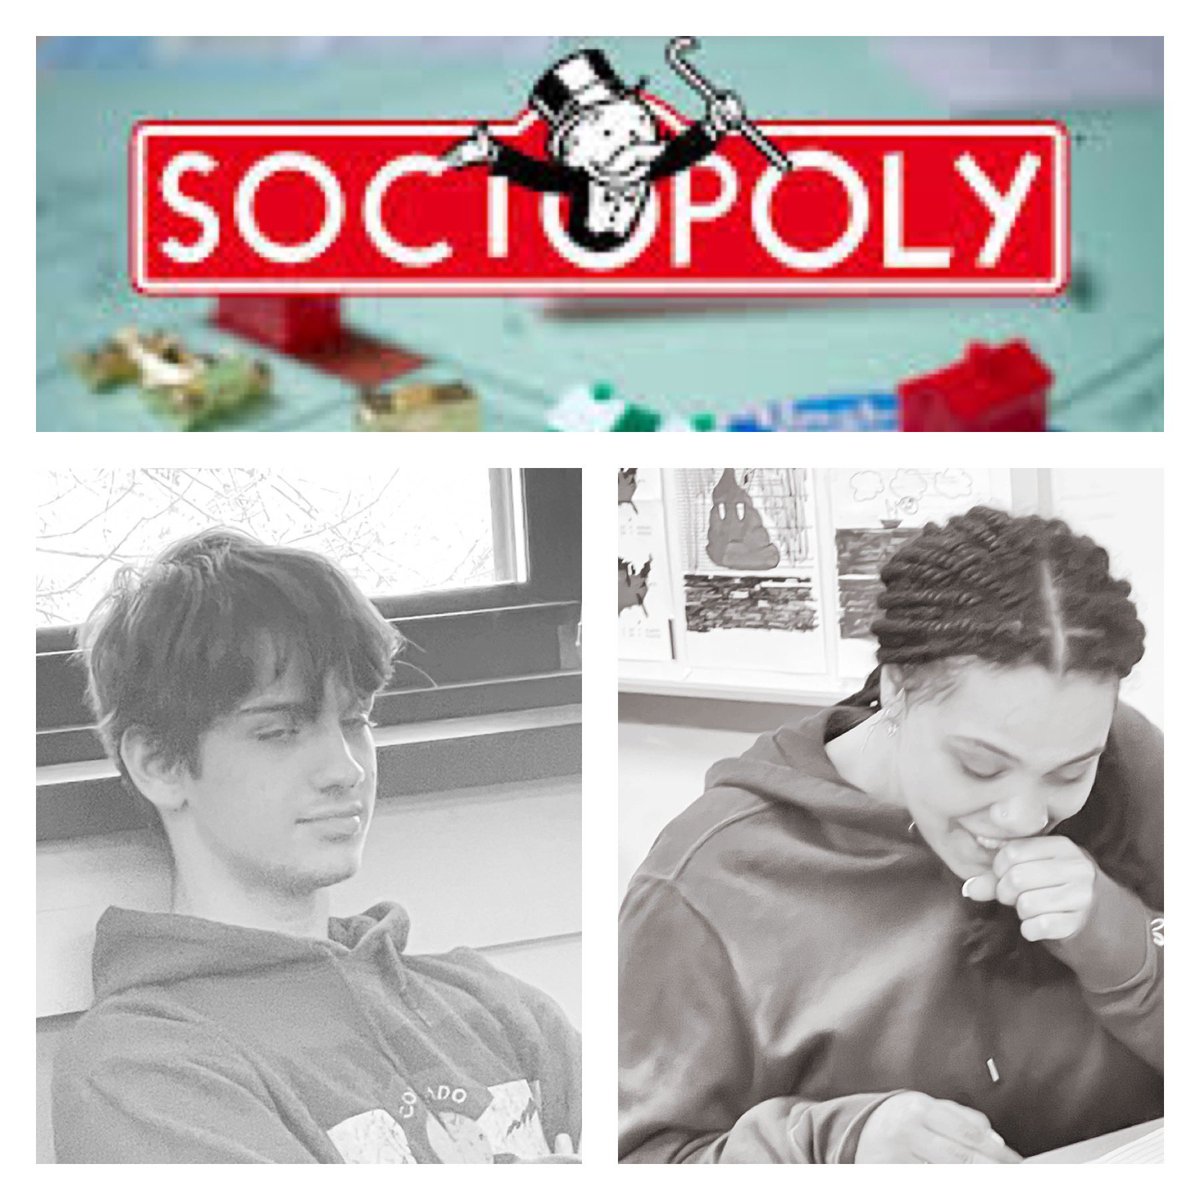 Students in #Sociology at @ValleyParkHS played #SOCIOPOLY today. #socialstratification #economicinequality #socialclass #lifechances (the faces alone show me that they “got it” but we’ll recap tomorrow) #VPpride